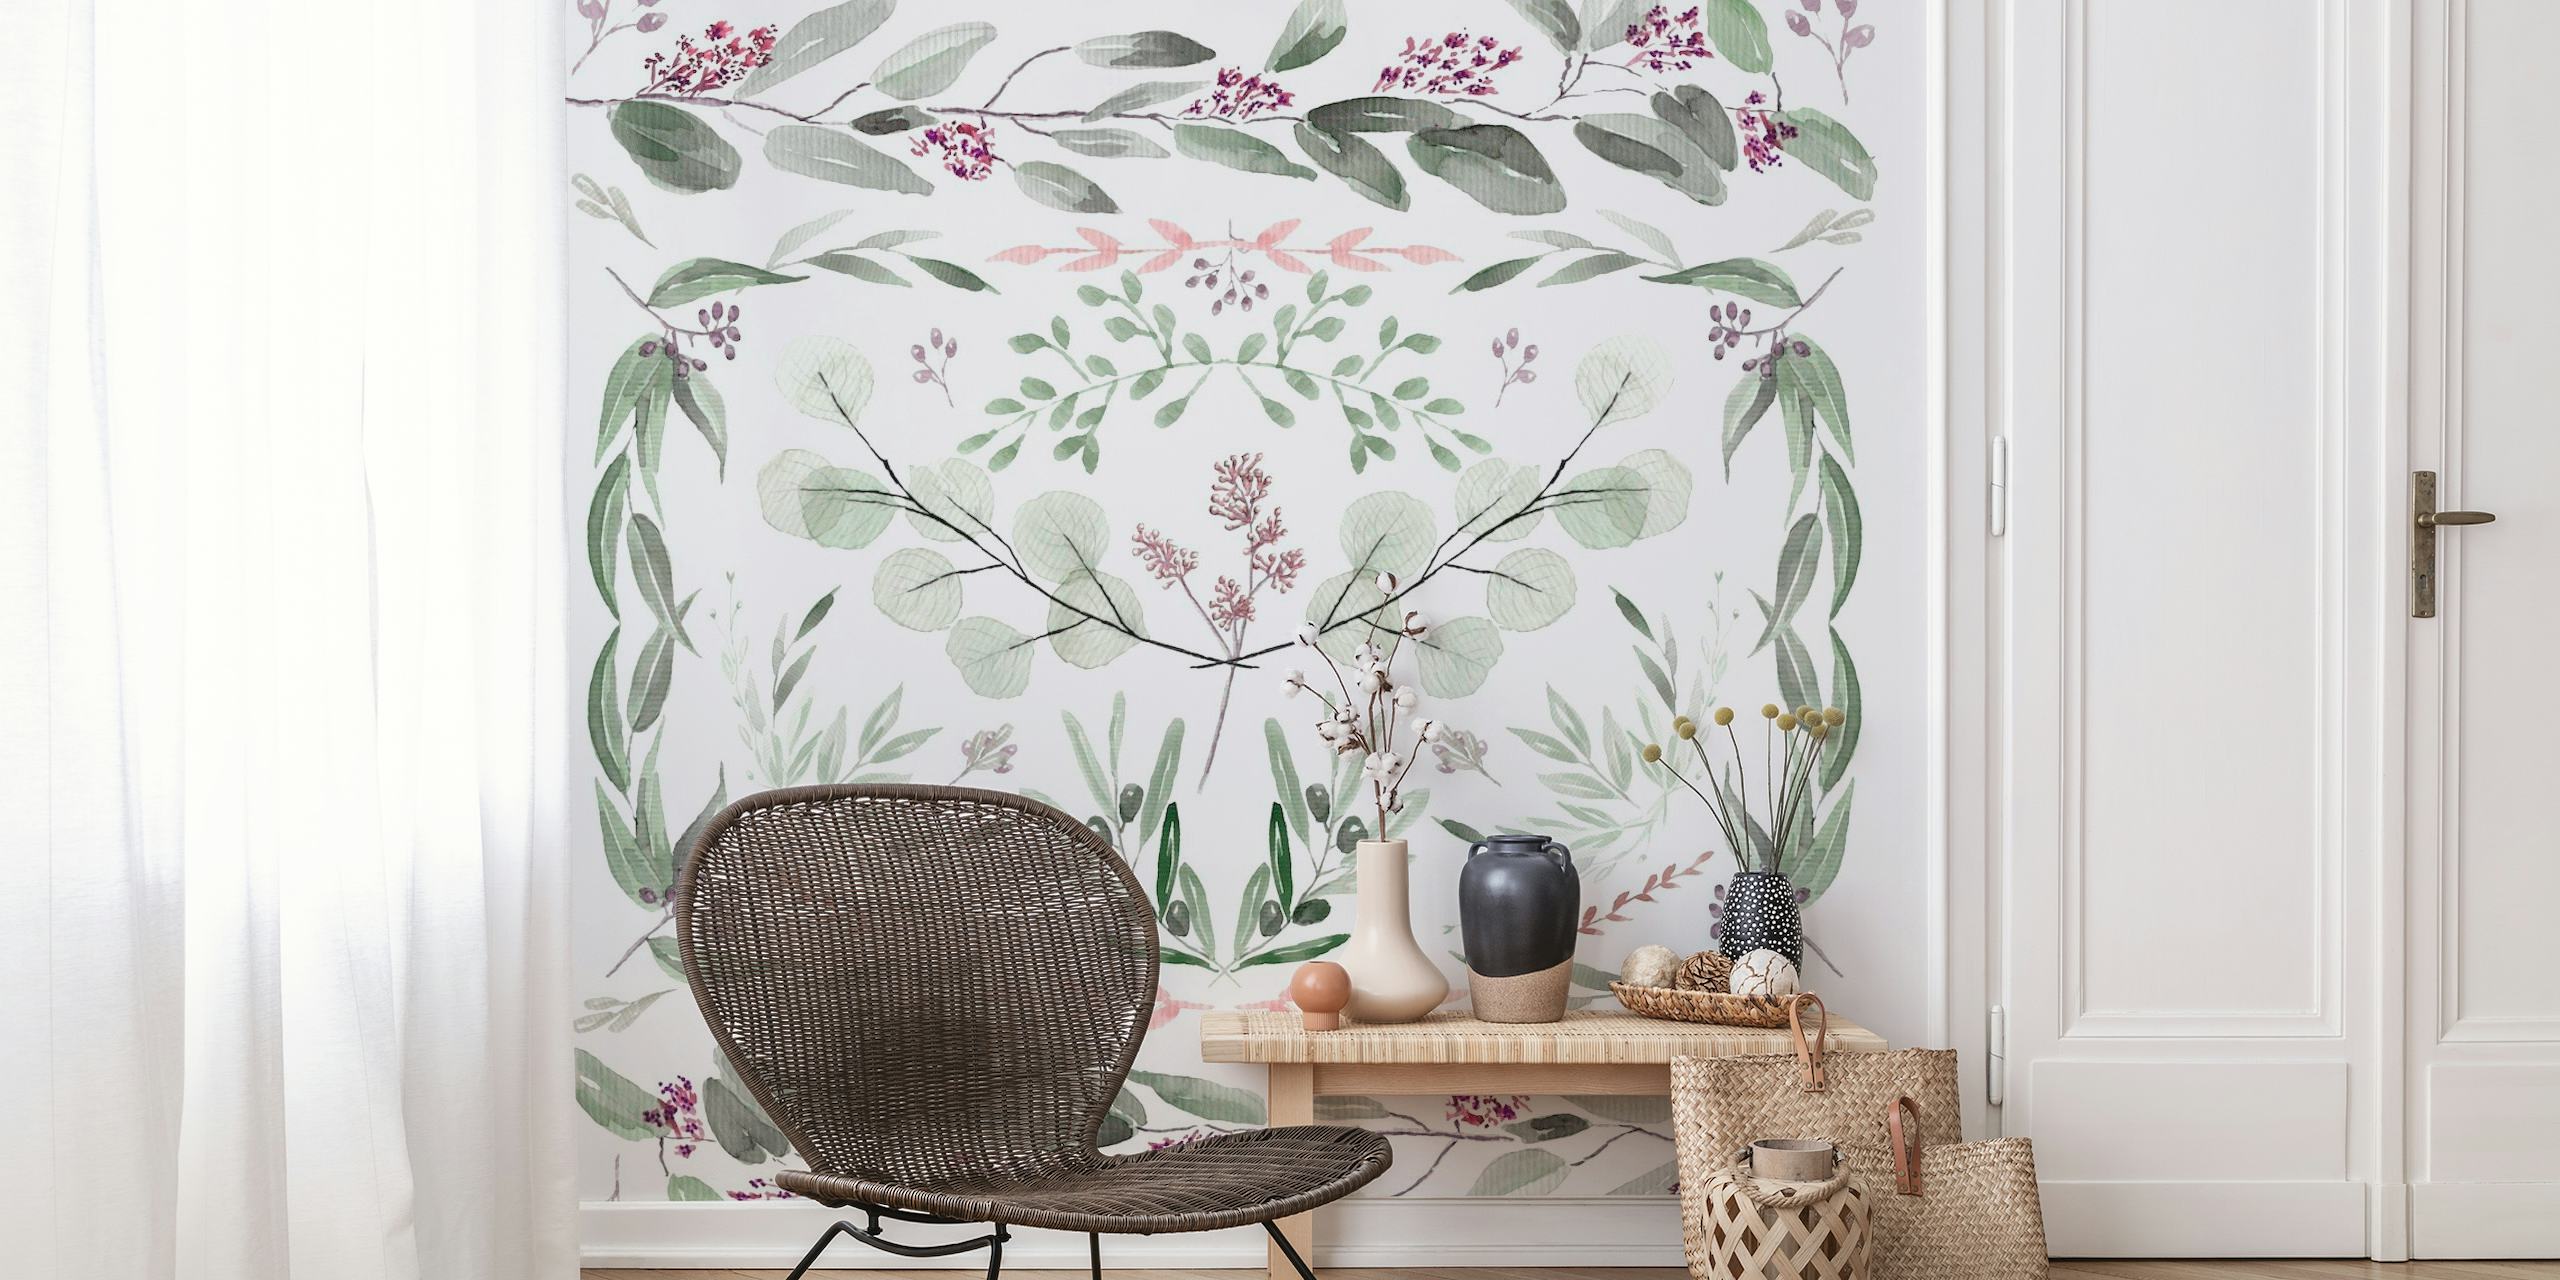 Eucalyptus Scene Olive and Pink Wall Mural papel pintado